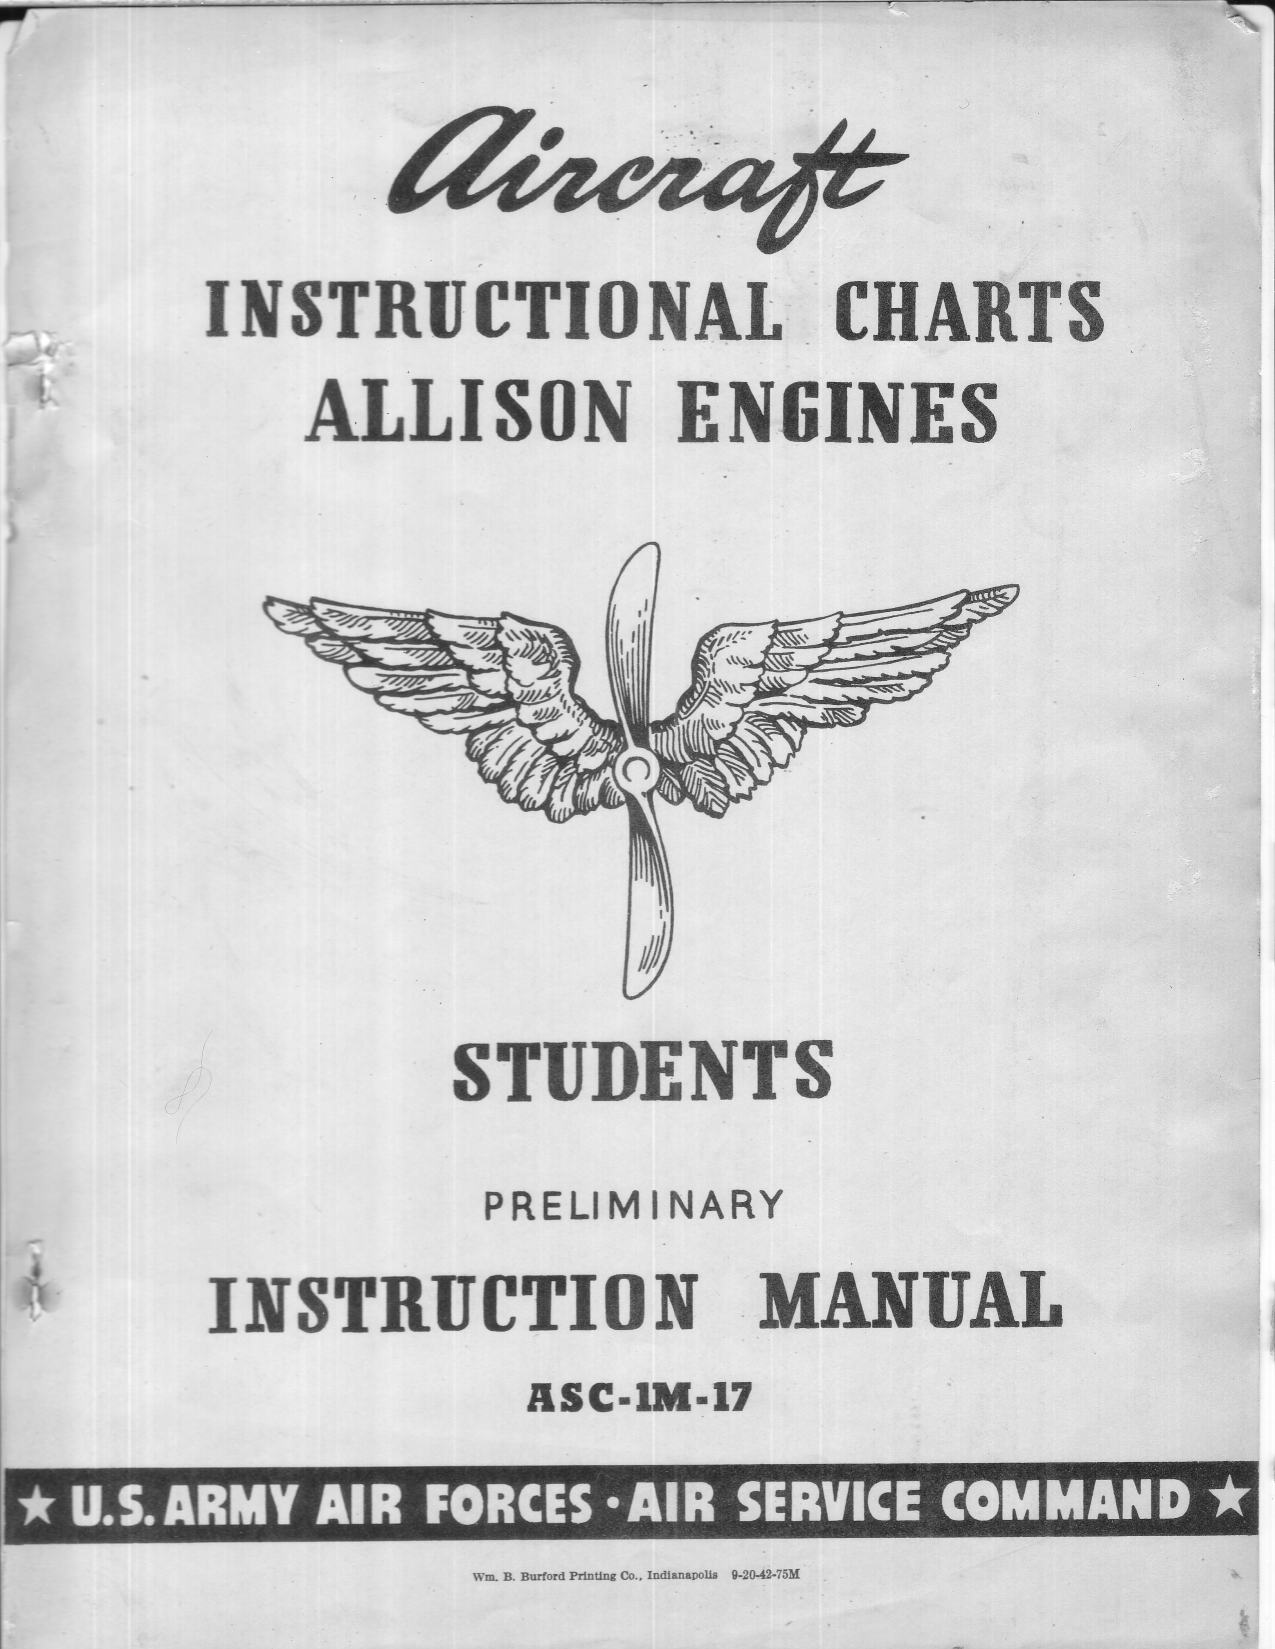 Sample page 1 from AirCorps Library document: Student Instructional Charts - Allison Engine ASC-1M-17